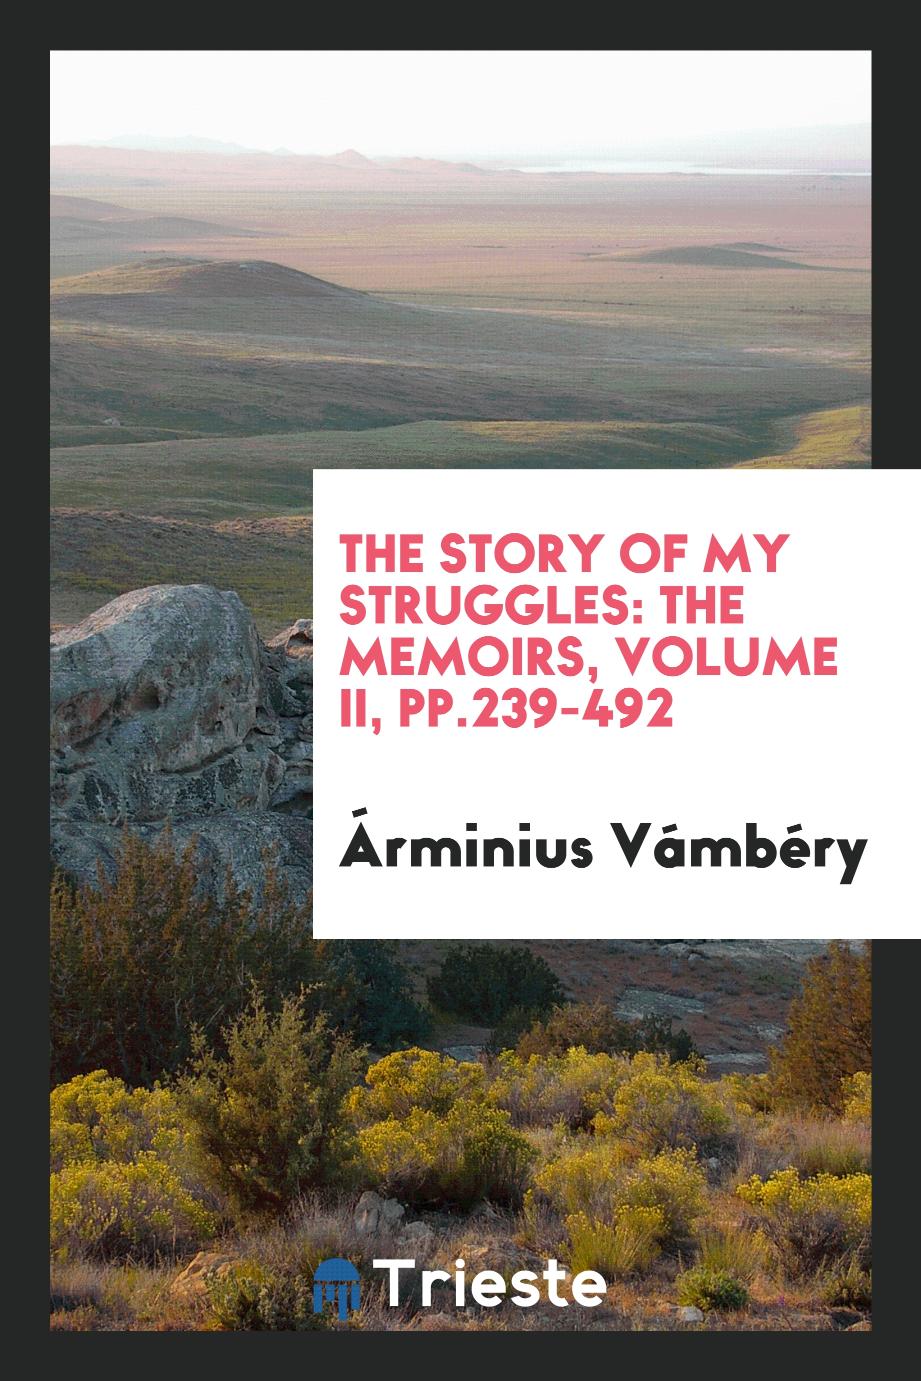 The story of my struggles: the memoirs, Volume II, pp.239-492